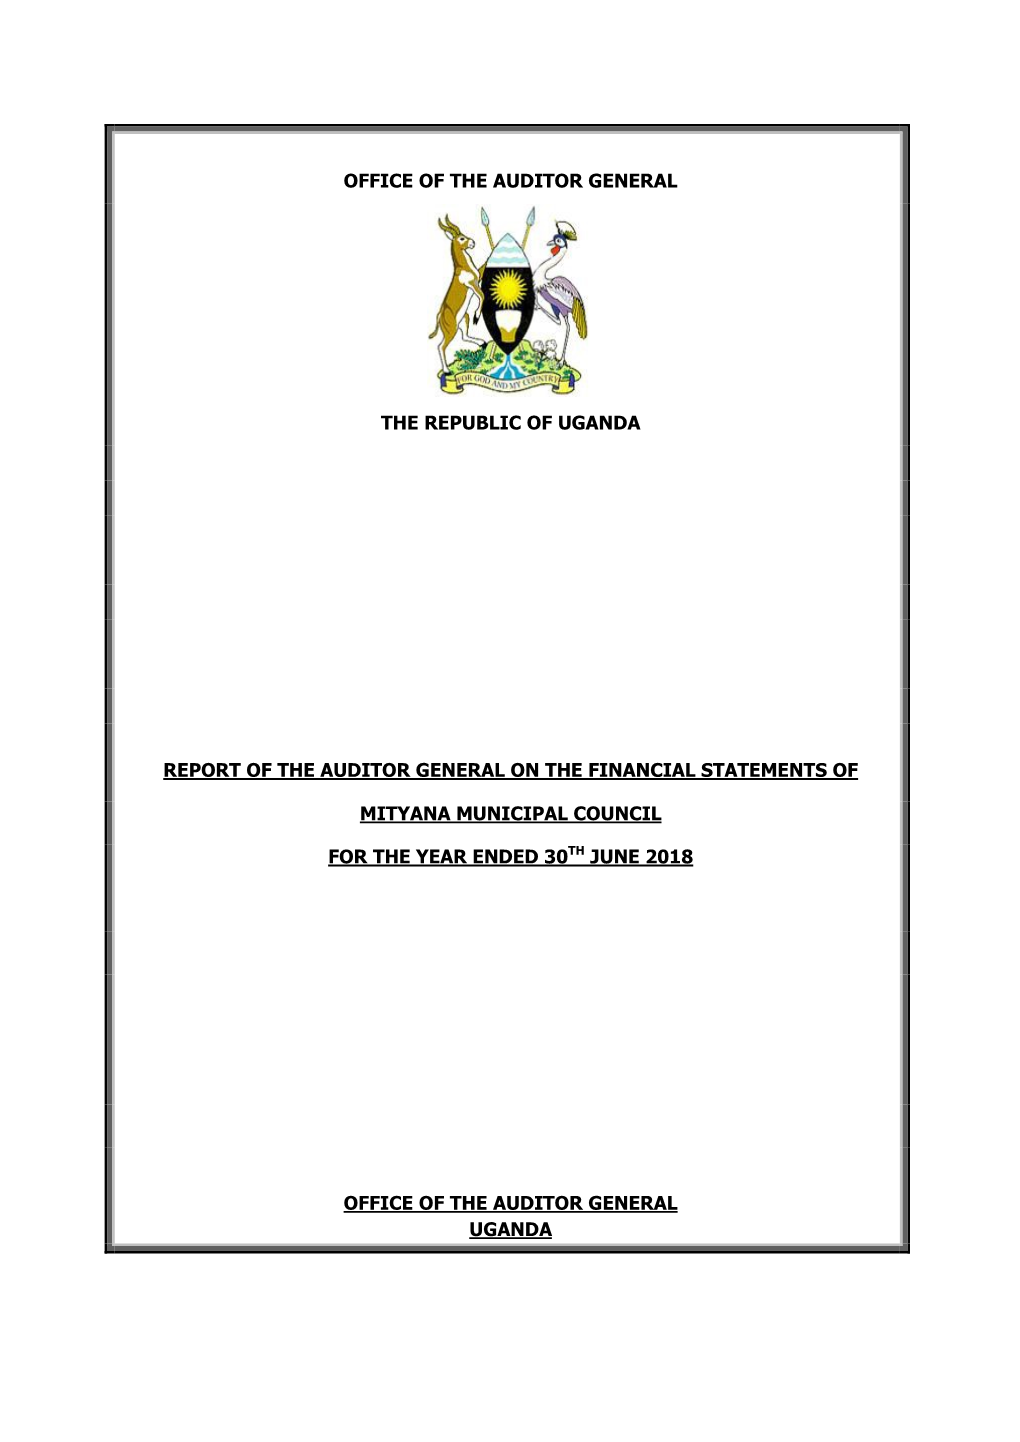 Office of the Auditor General the Republic of Uganda Report of the Auditor General on the Financial Statements of Mityana Munici